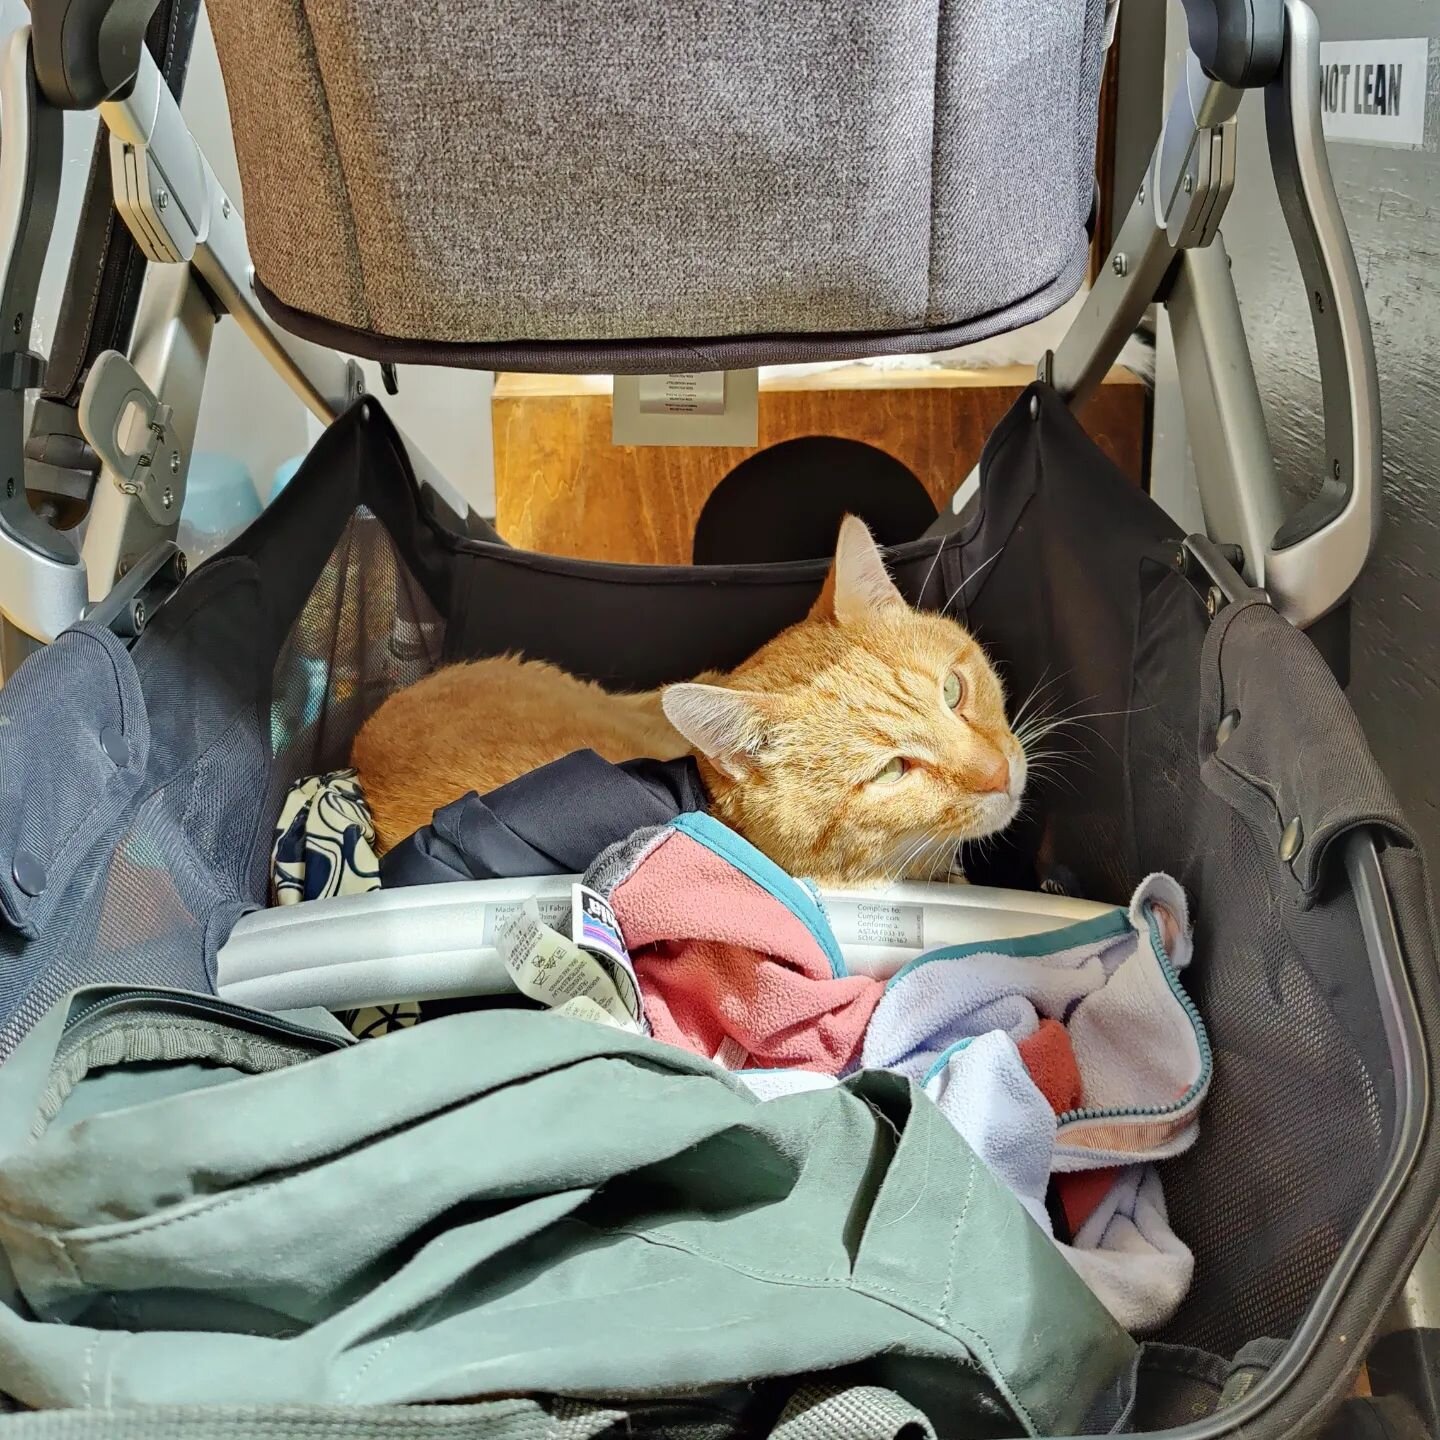 We will be continuing our complimentary bag check service through the summer and extending it to include strollers; just make sure to check for the attendant before you leave!

#adoptdontshop❤️ #rescuesaveslives🐾 #catwithjobs #adoptablecatsdenver #c